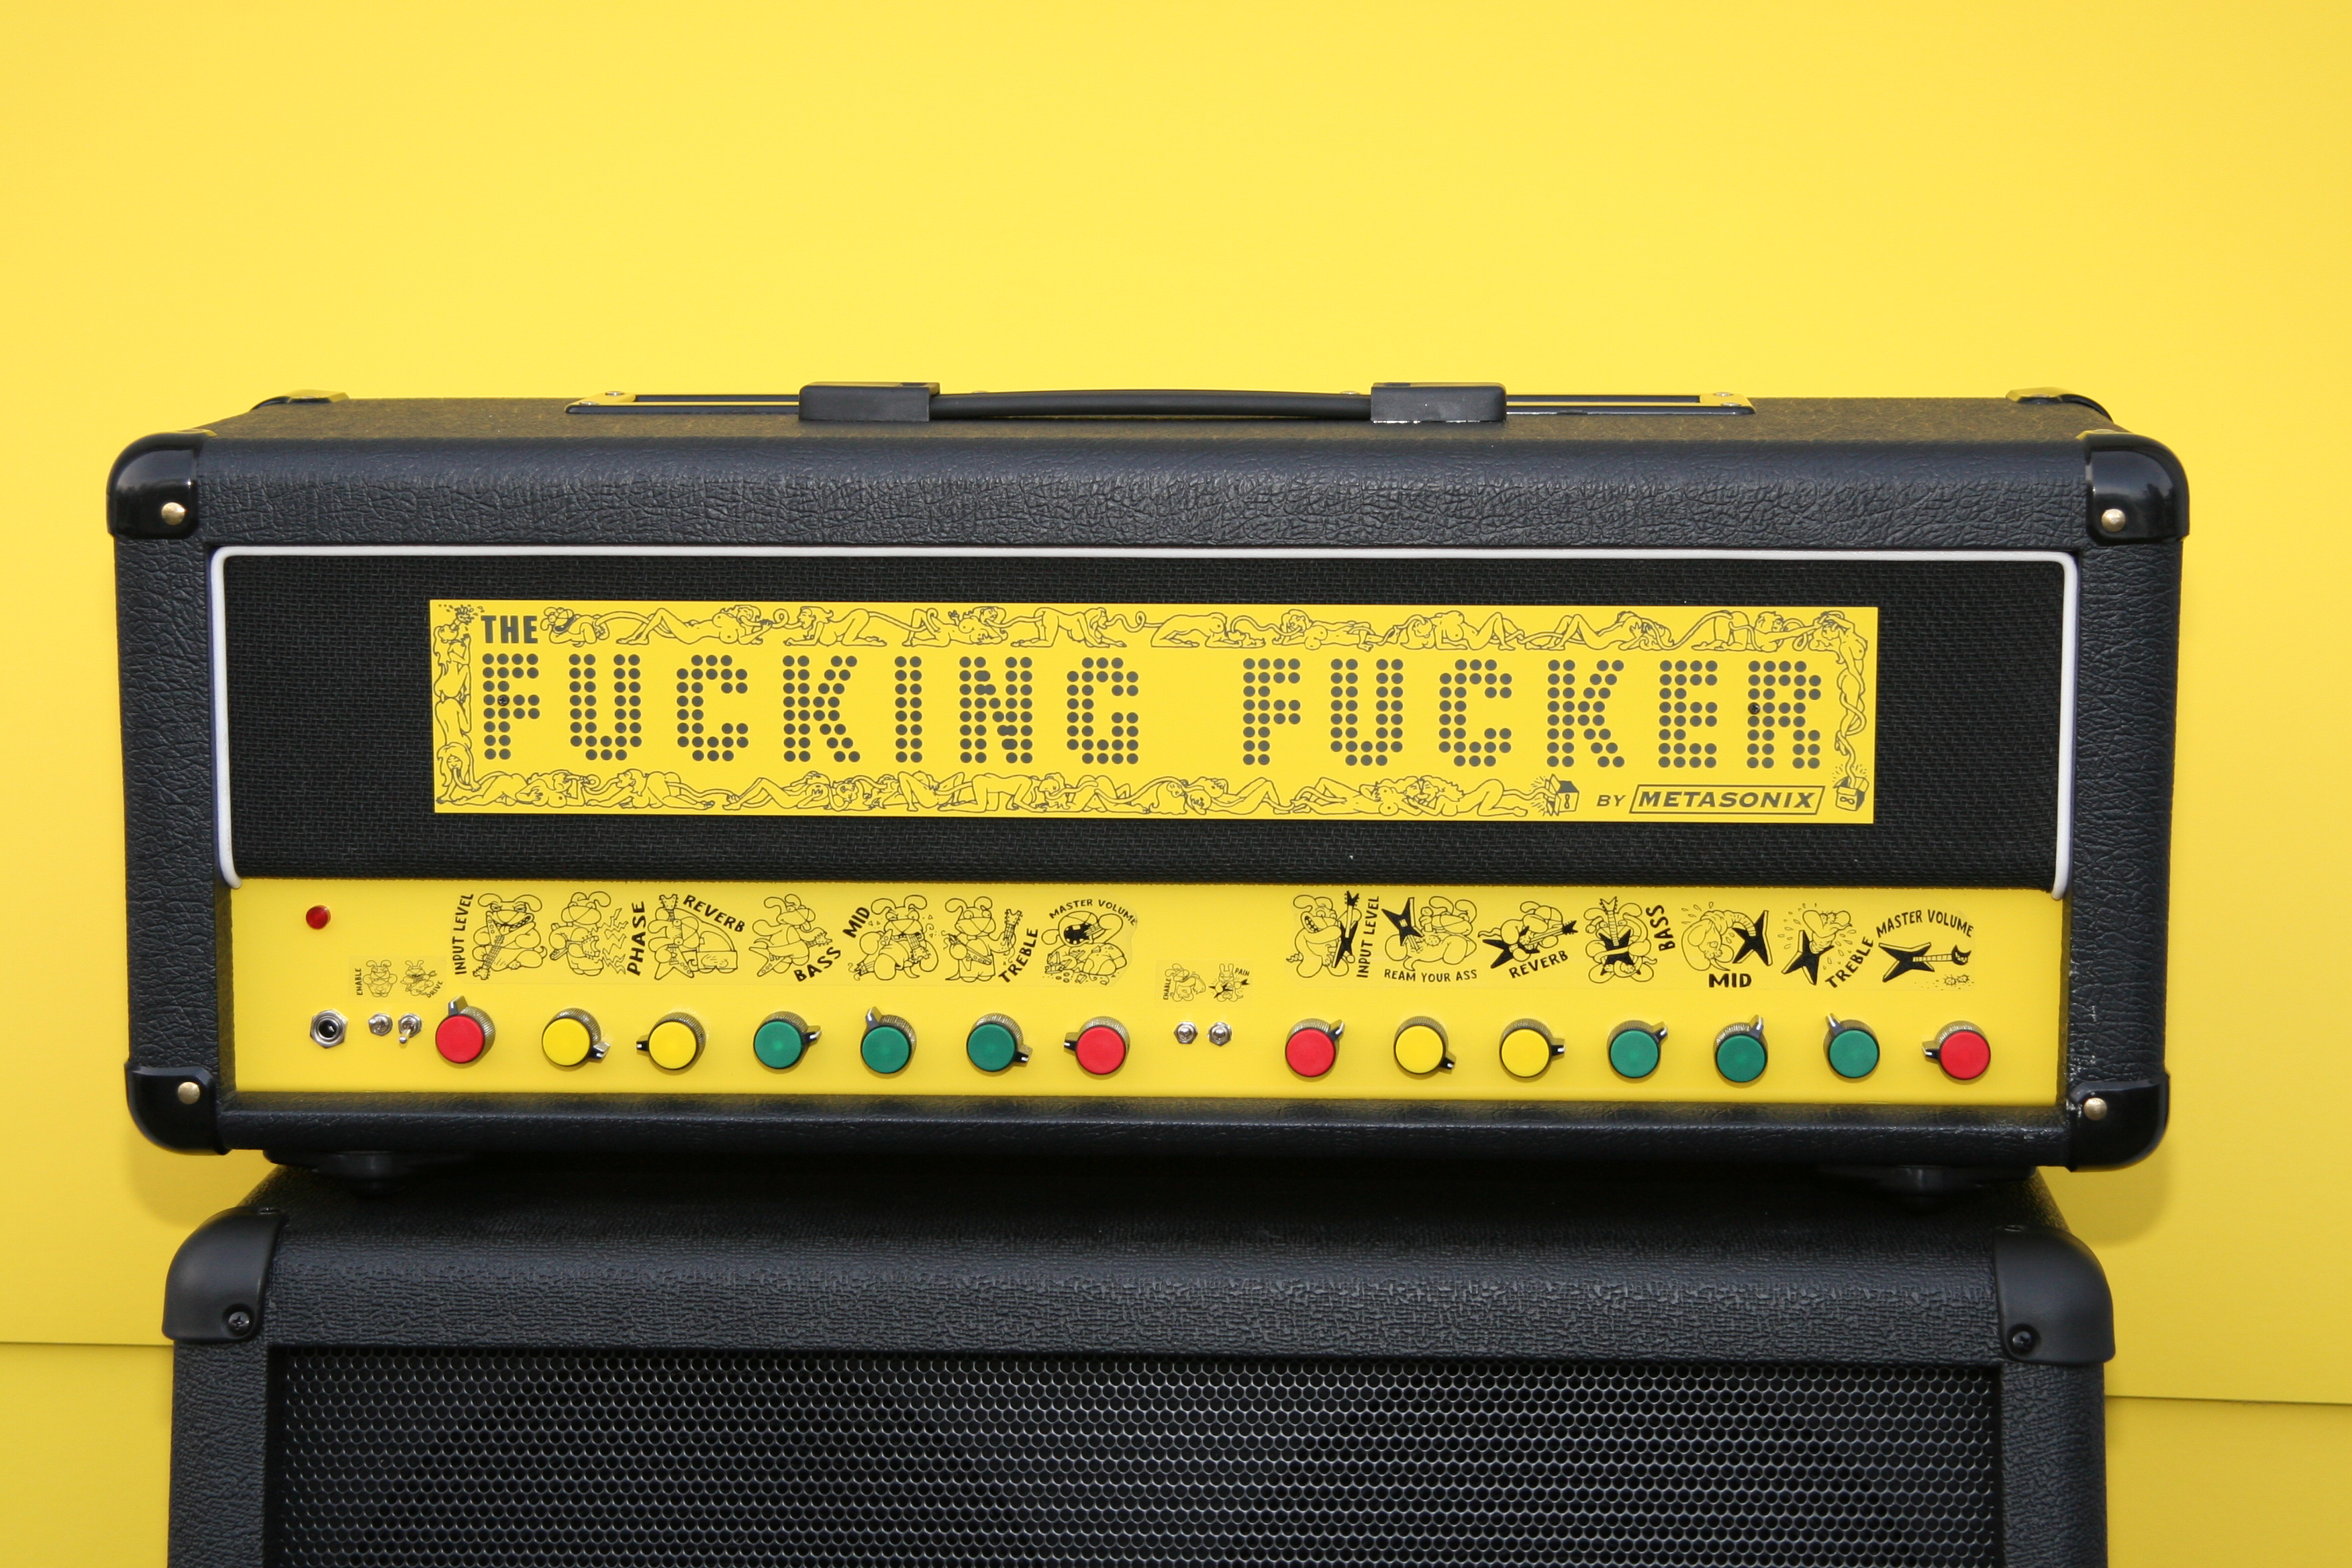 Now That’s a Fucking Fucker Amp…